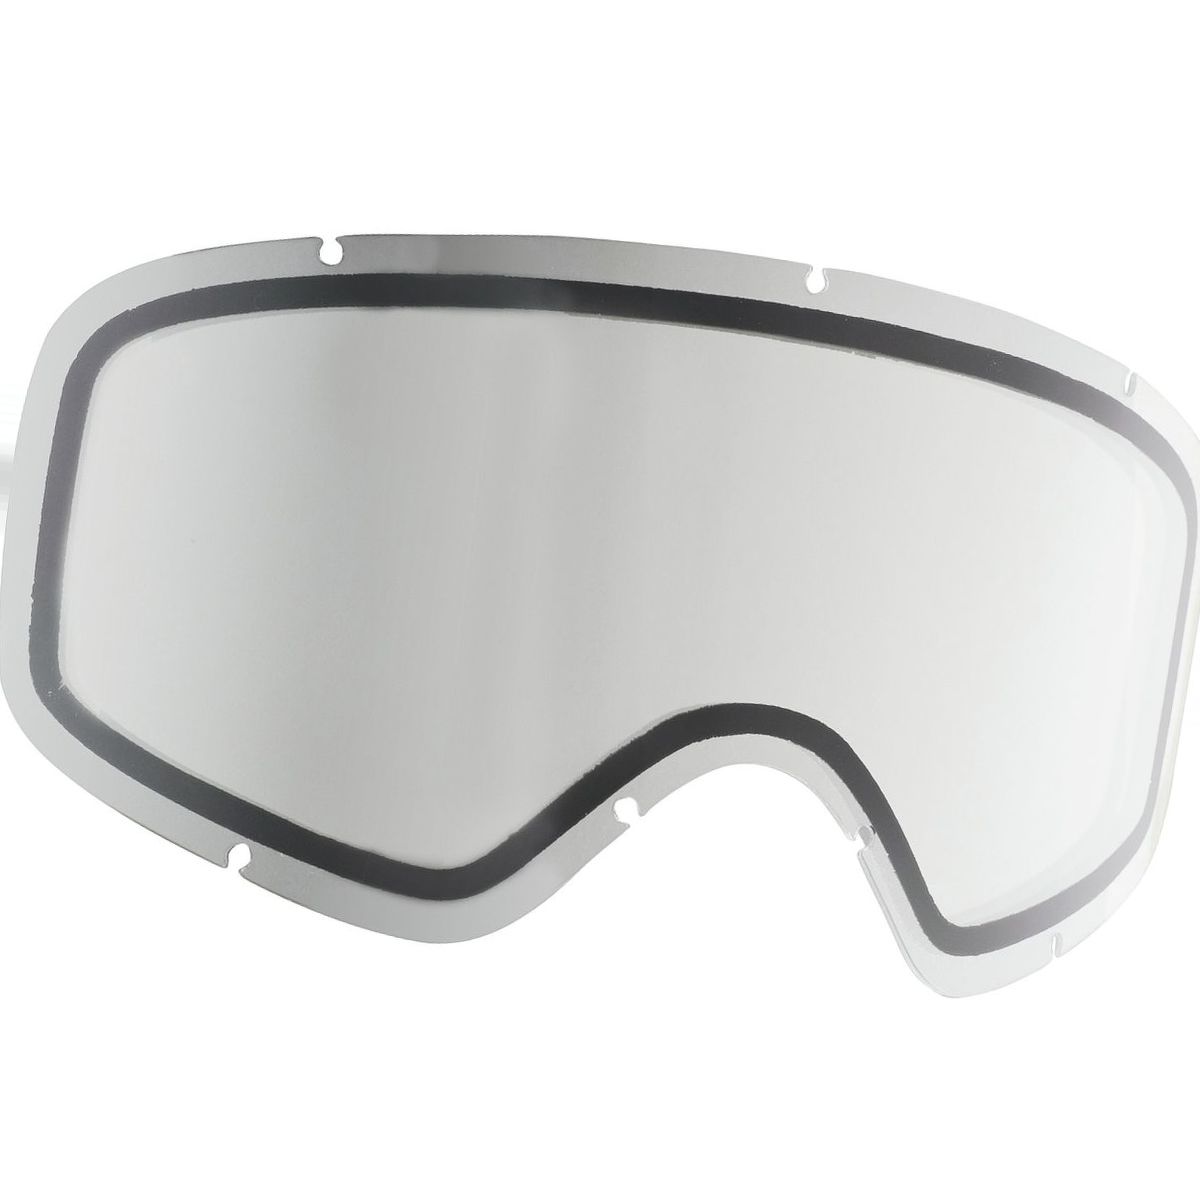 Anon Insight Goggles Replacement Lens - Women's